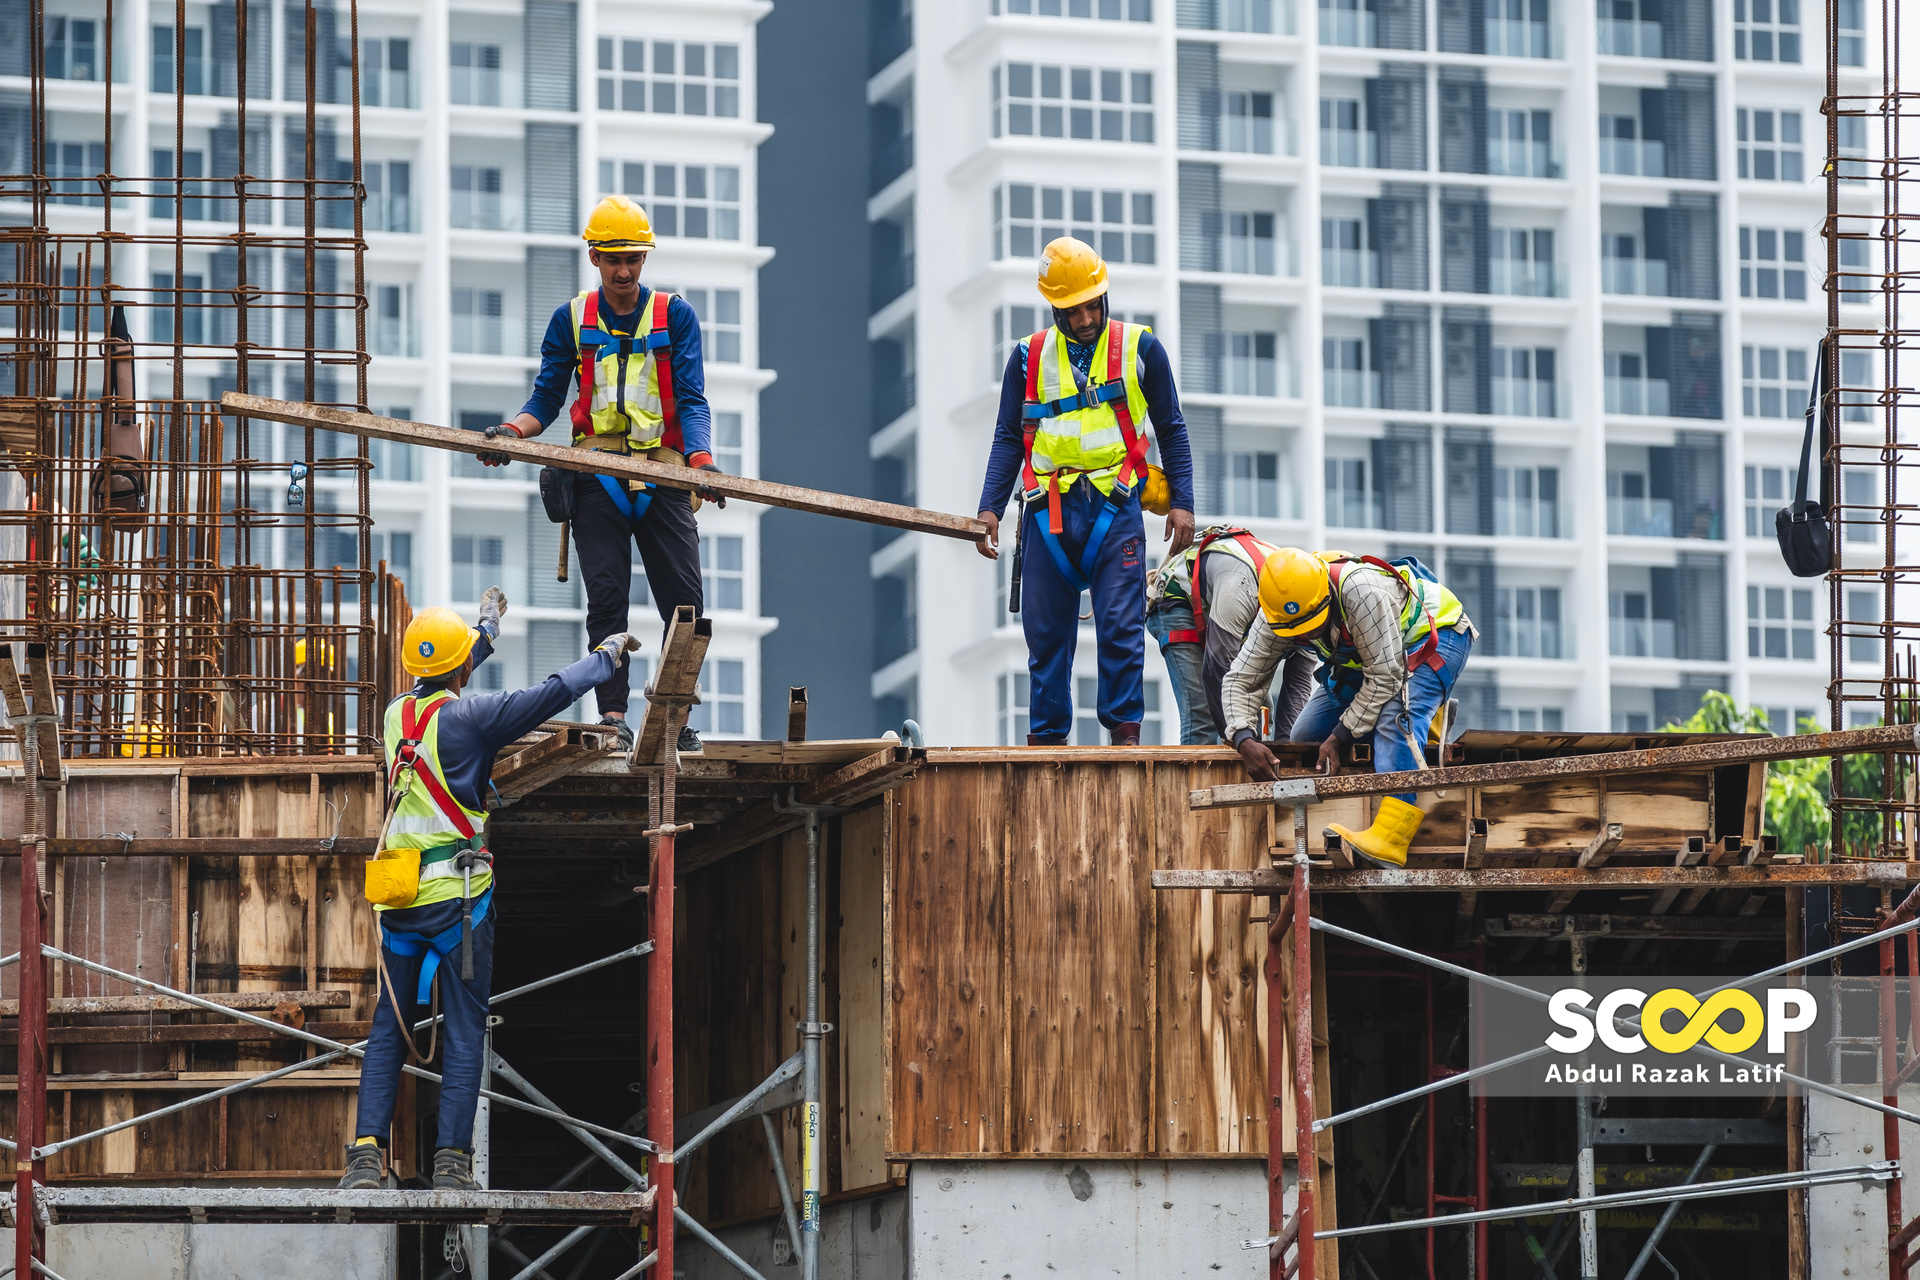 Amended OSH act requiring safety coordinators in workplaces effective June 1